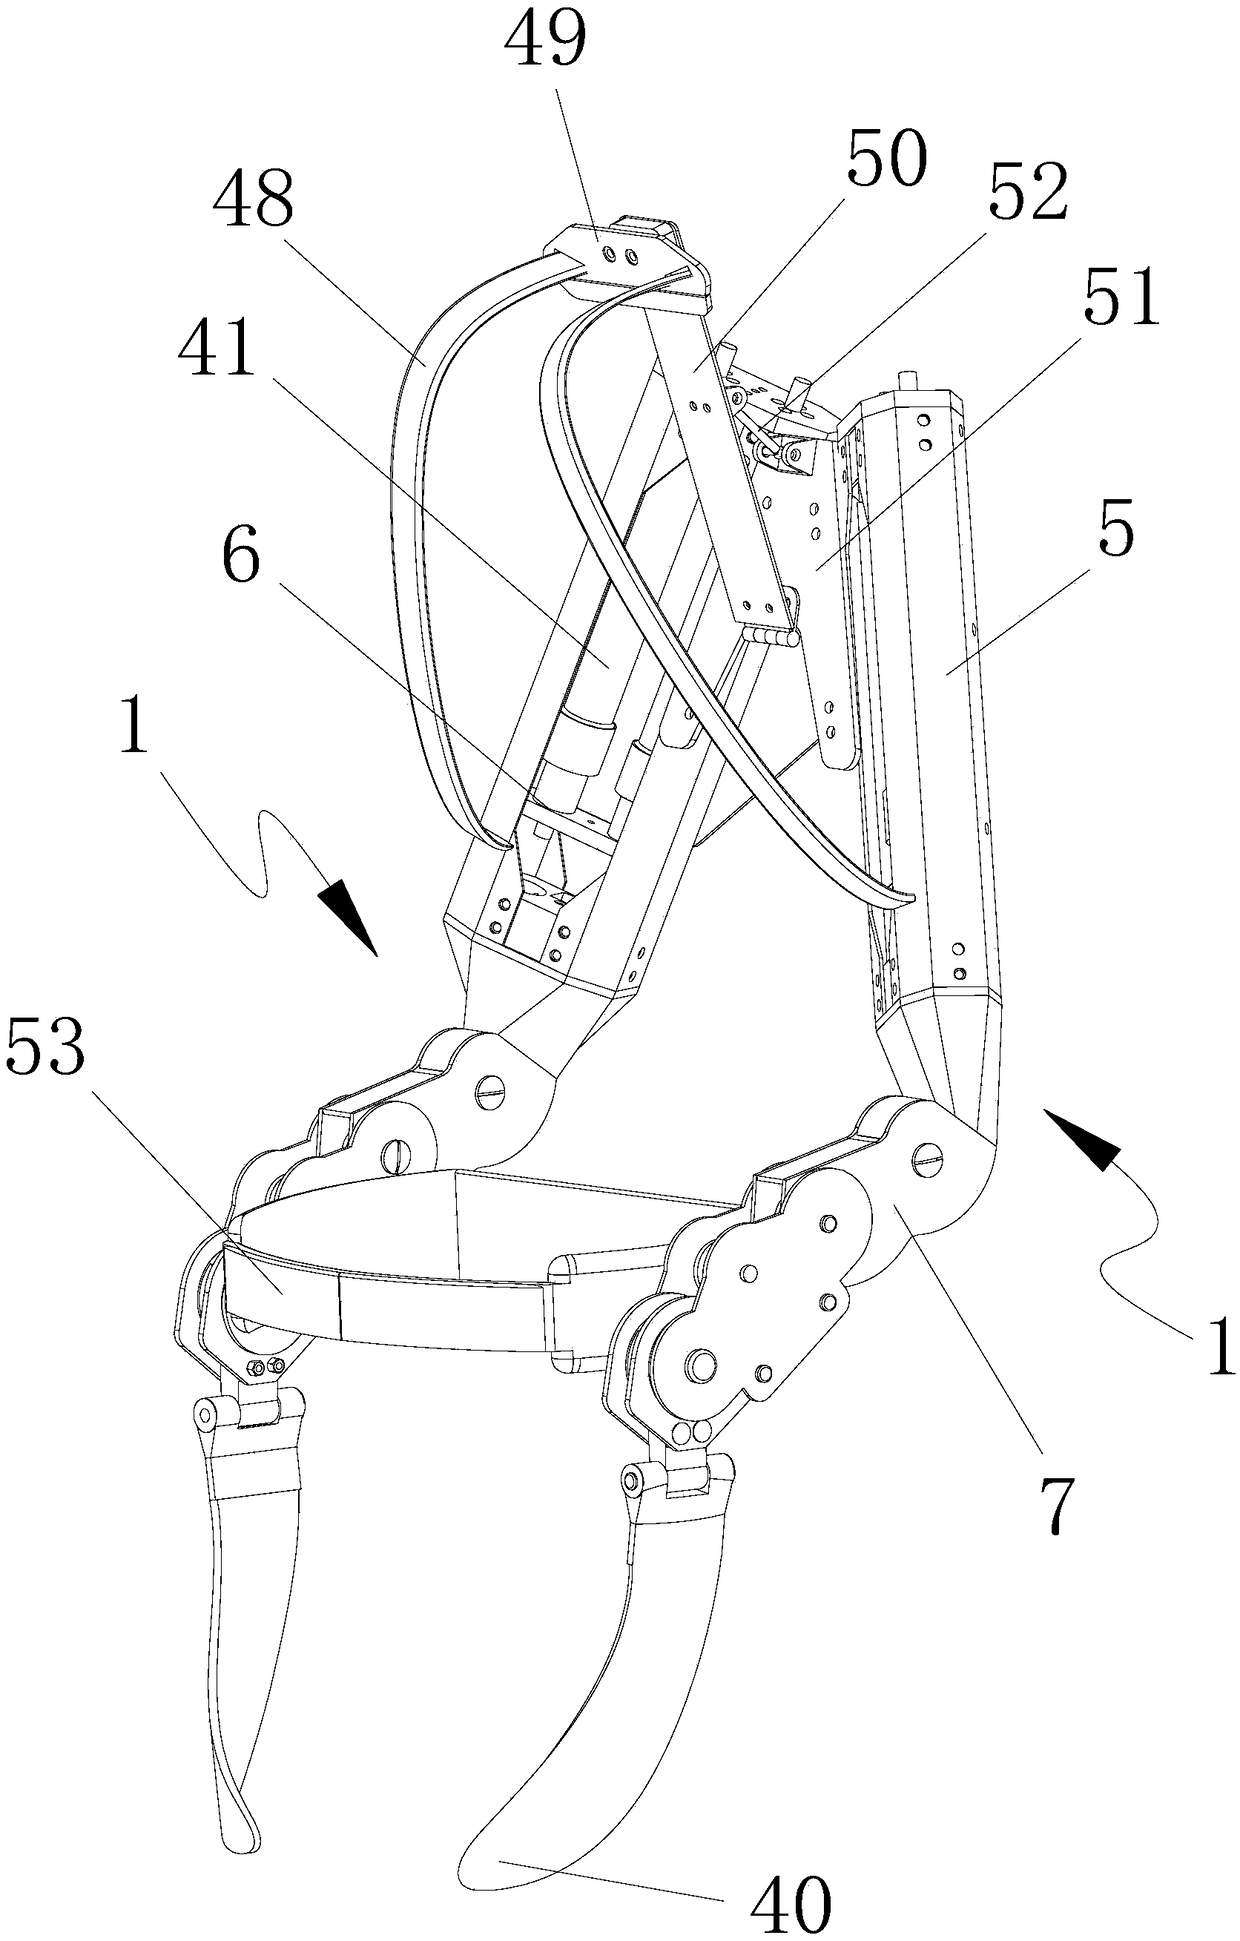 A pneumatic exoskeleton assisting device